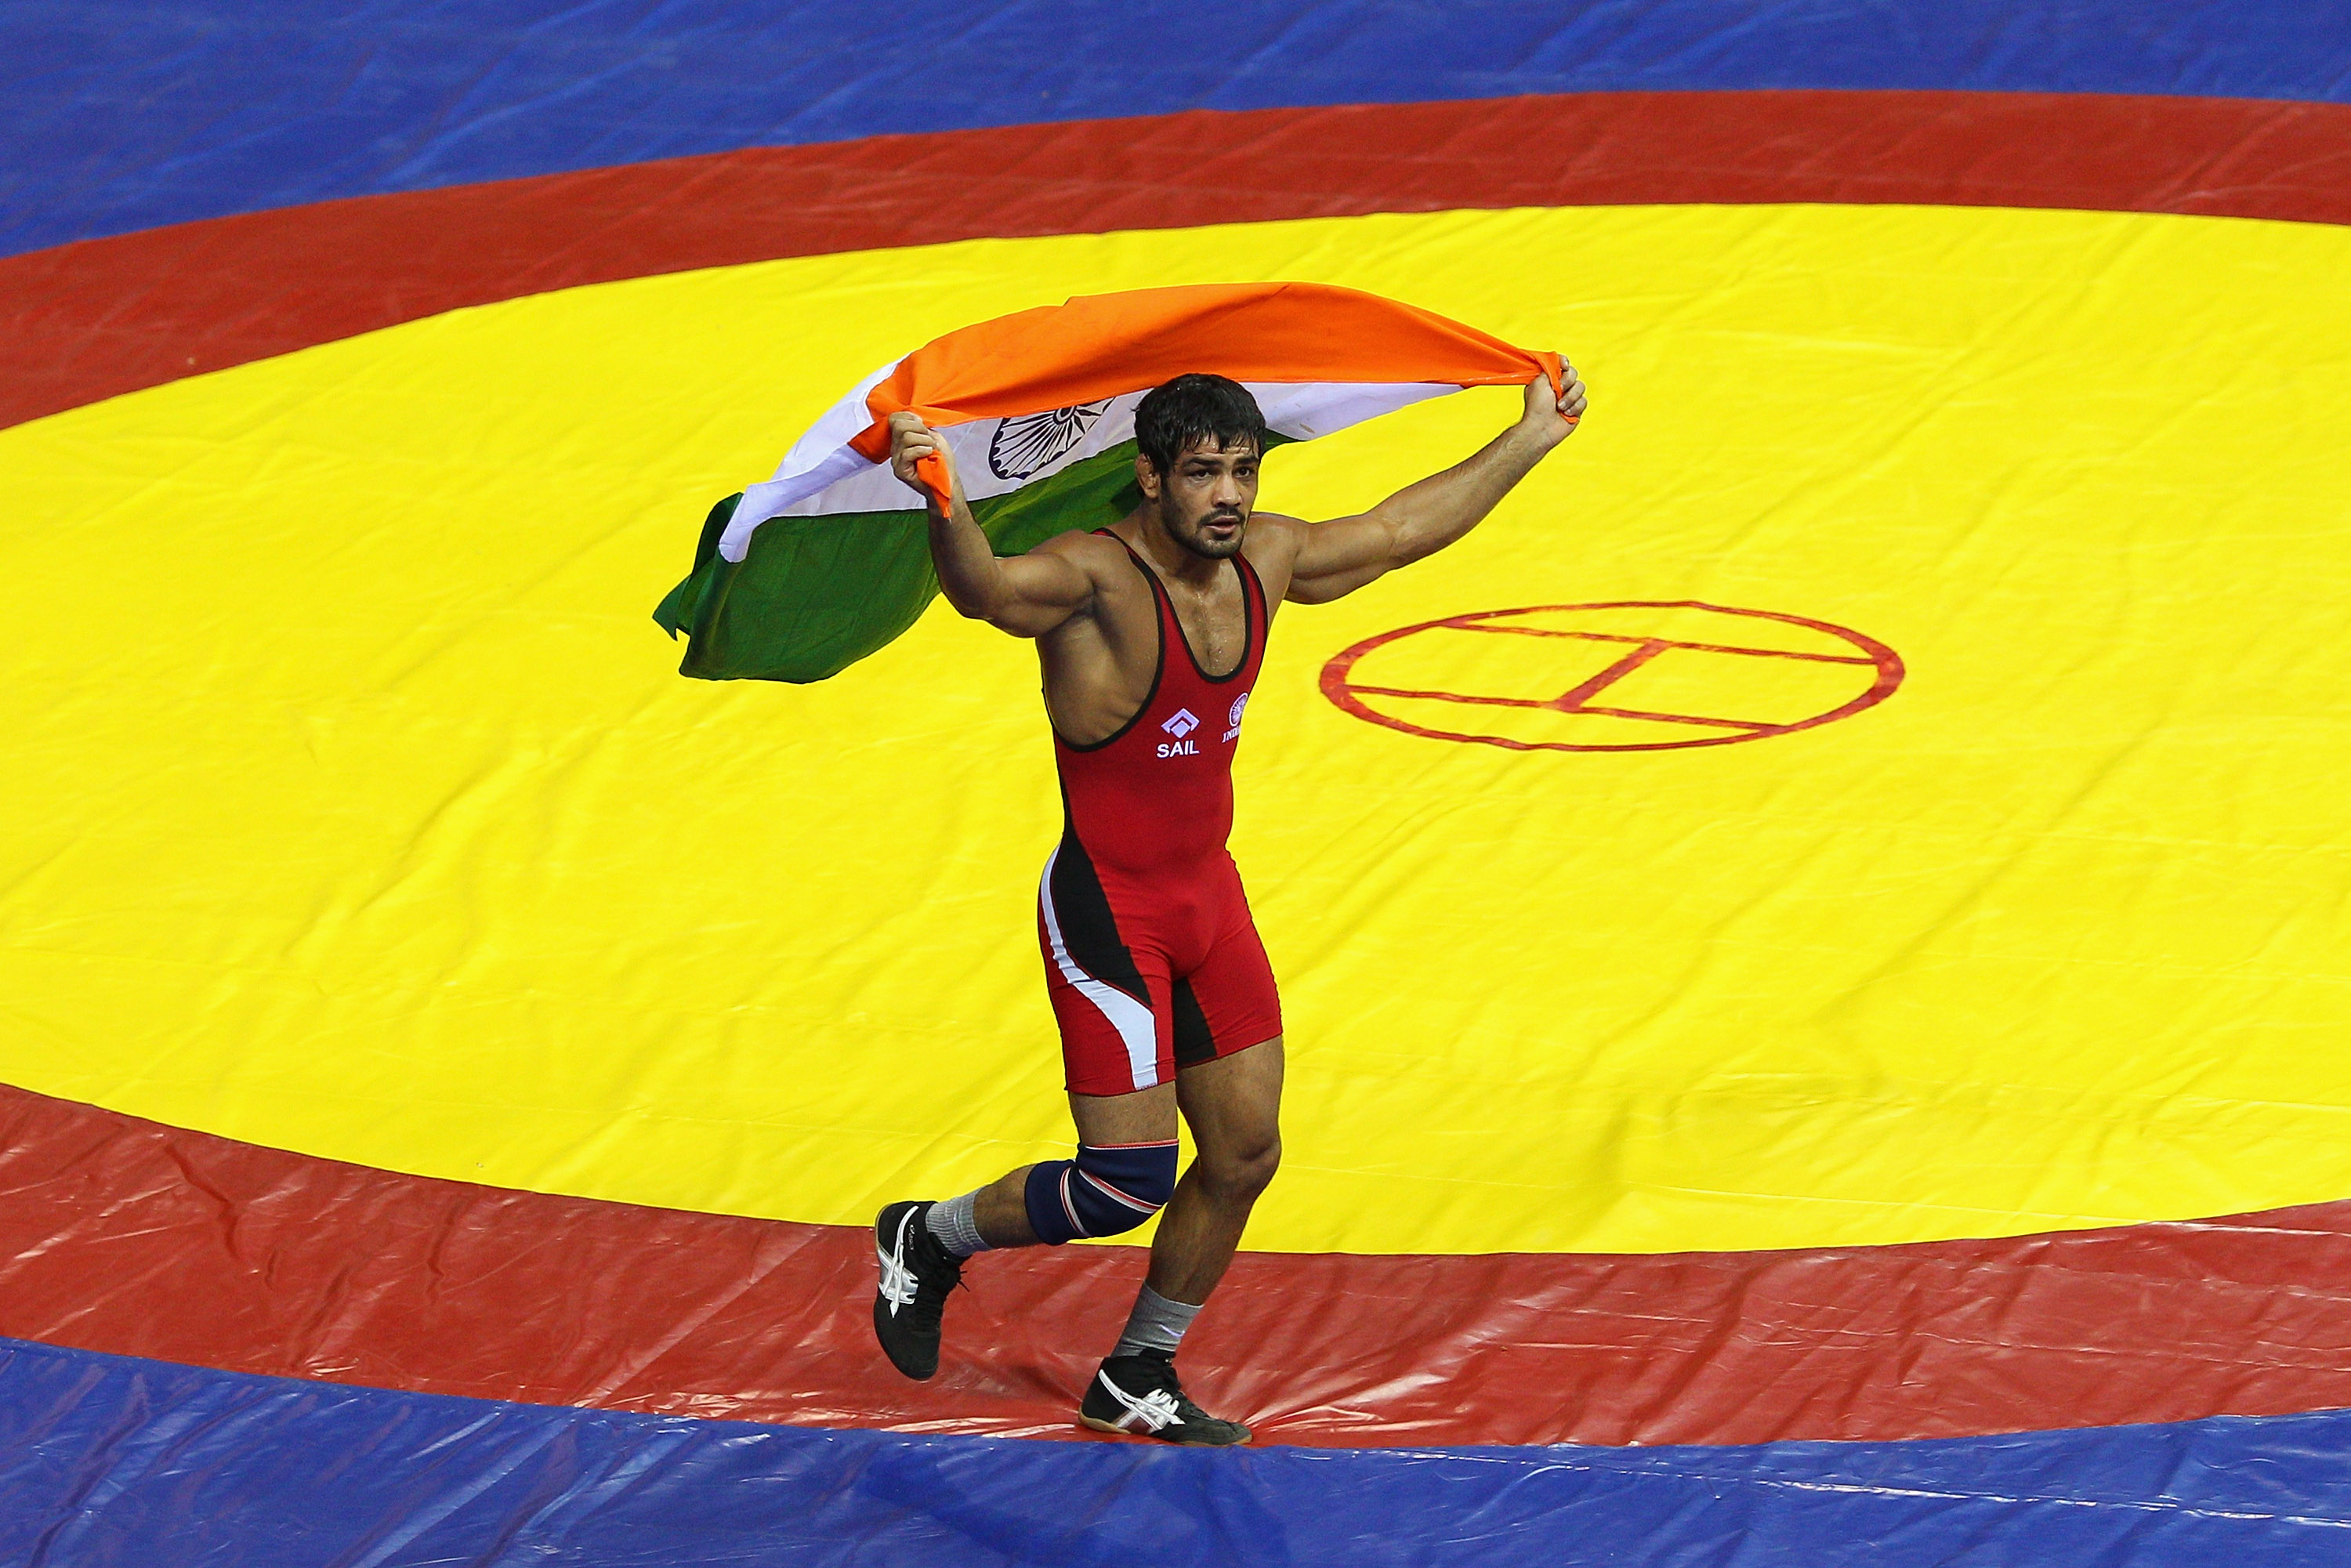 CWG-bound shooters and wrestlers are still waiting on their respective visas